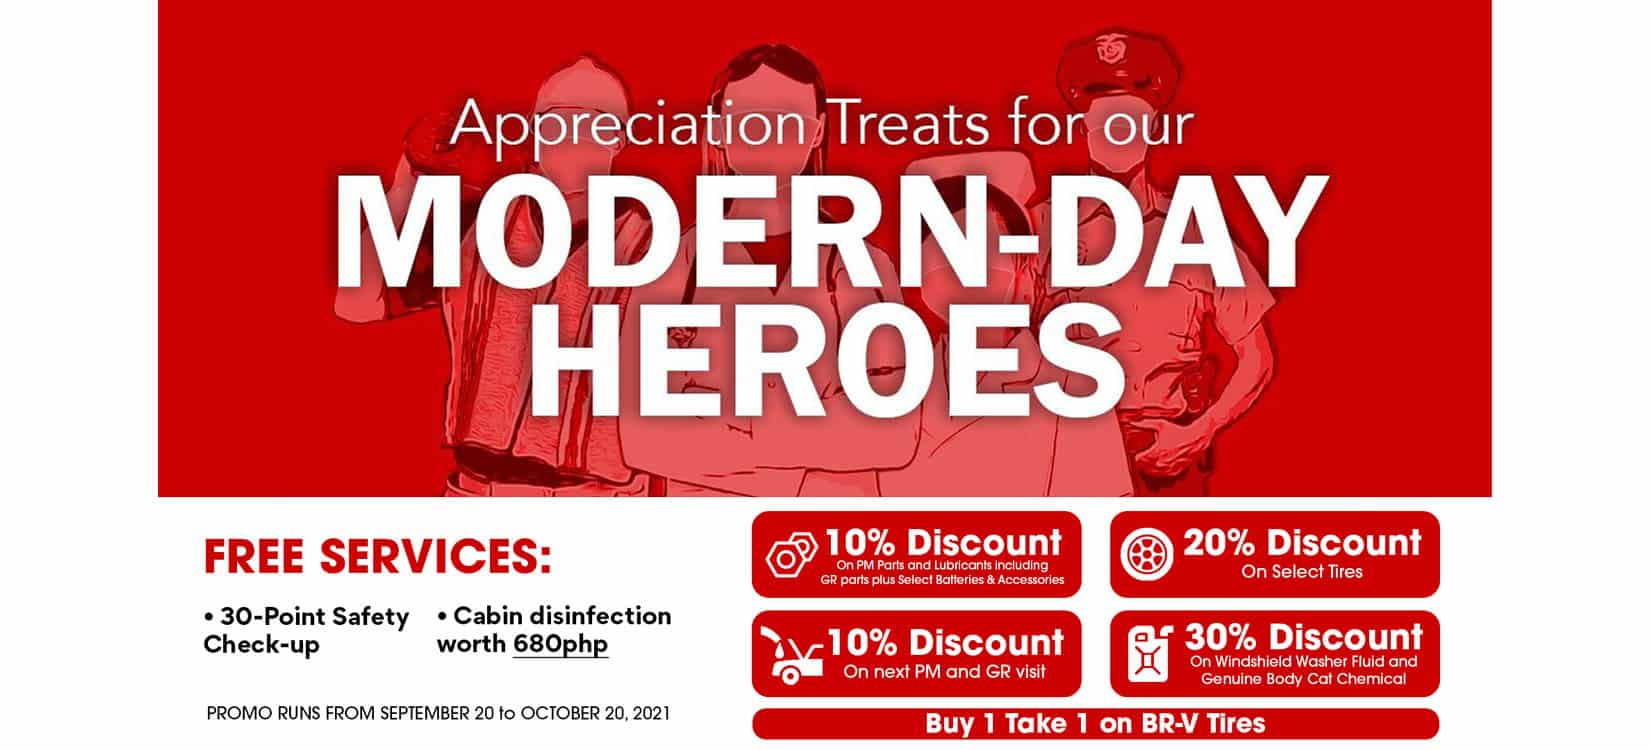 Honda honors frontliners and vaccinated customers with its exclusive deals and offers under Modern-Day Heroes promo